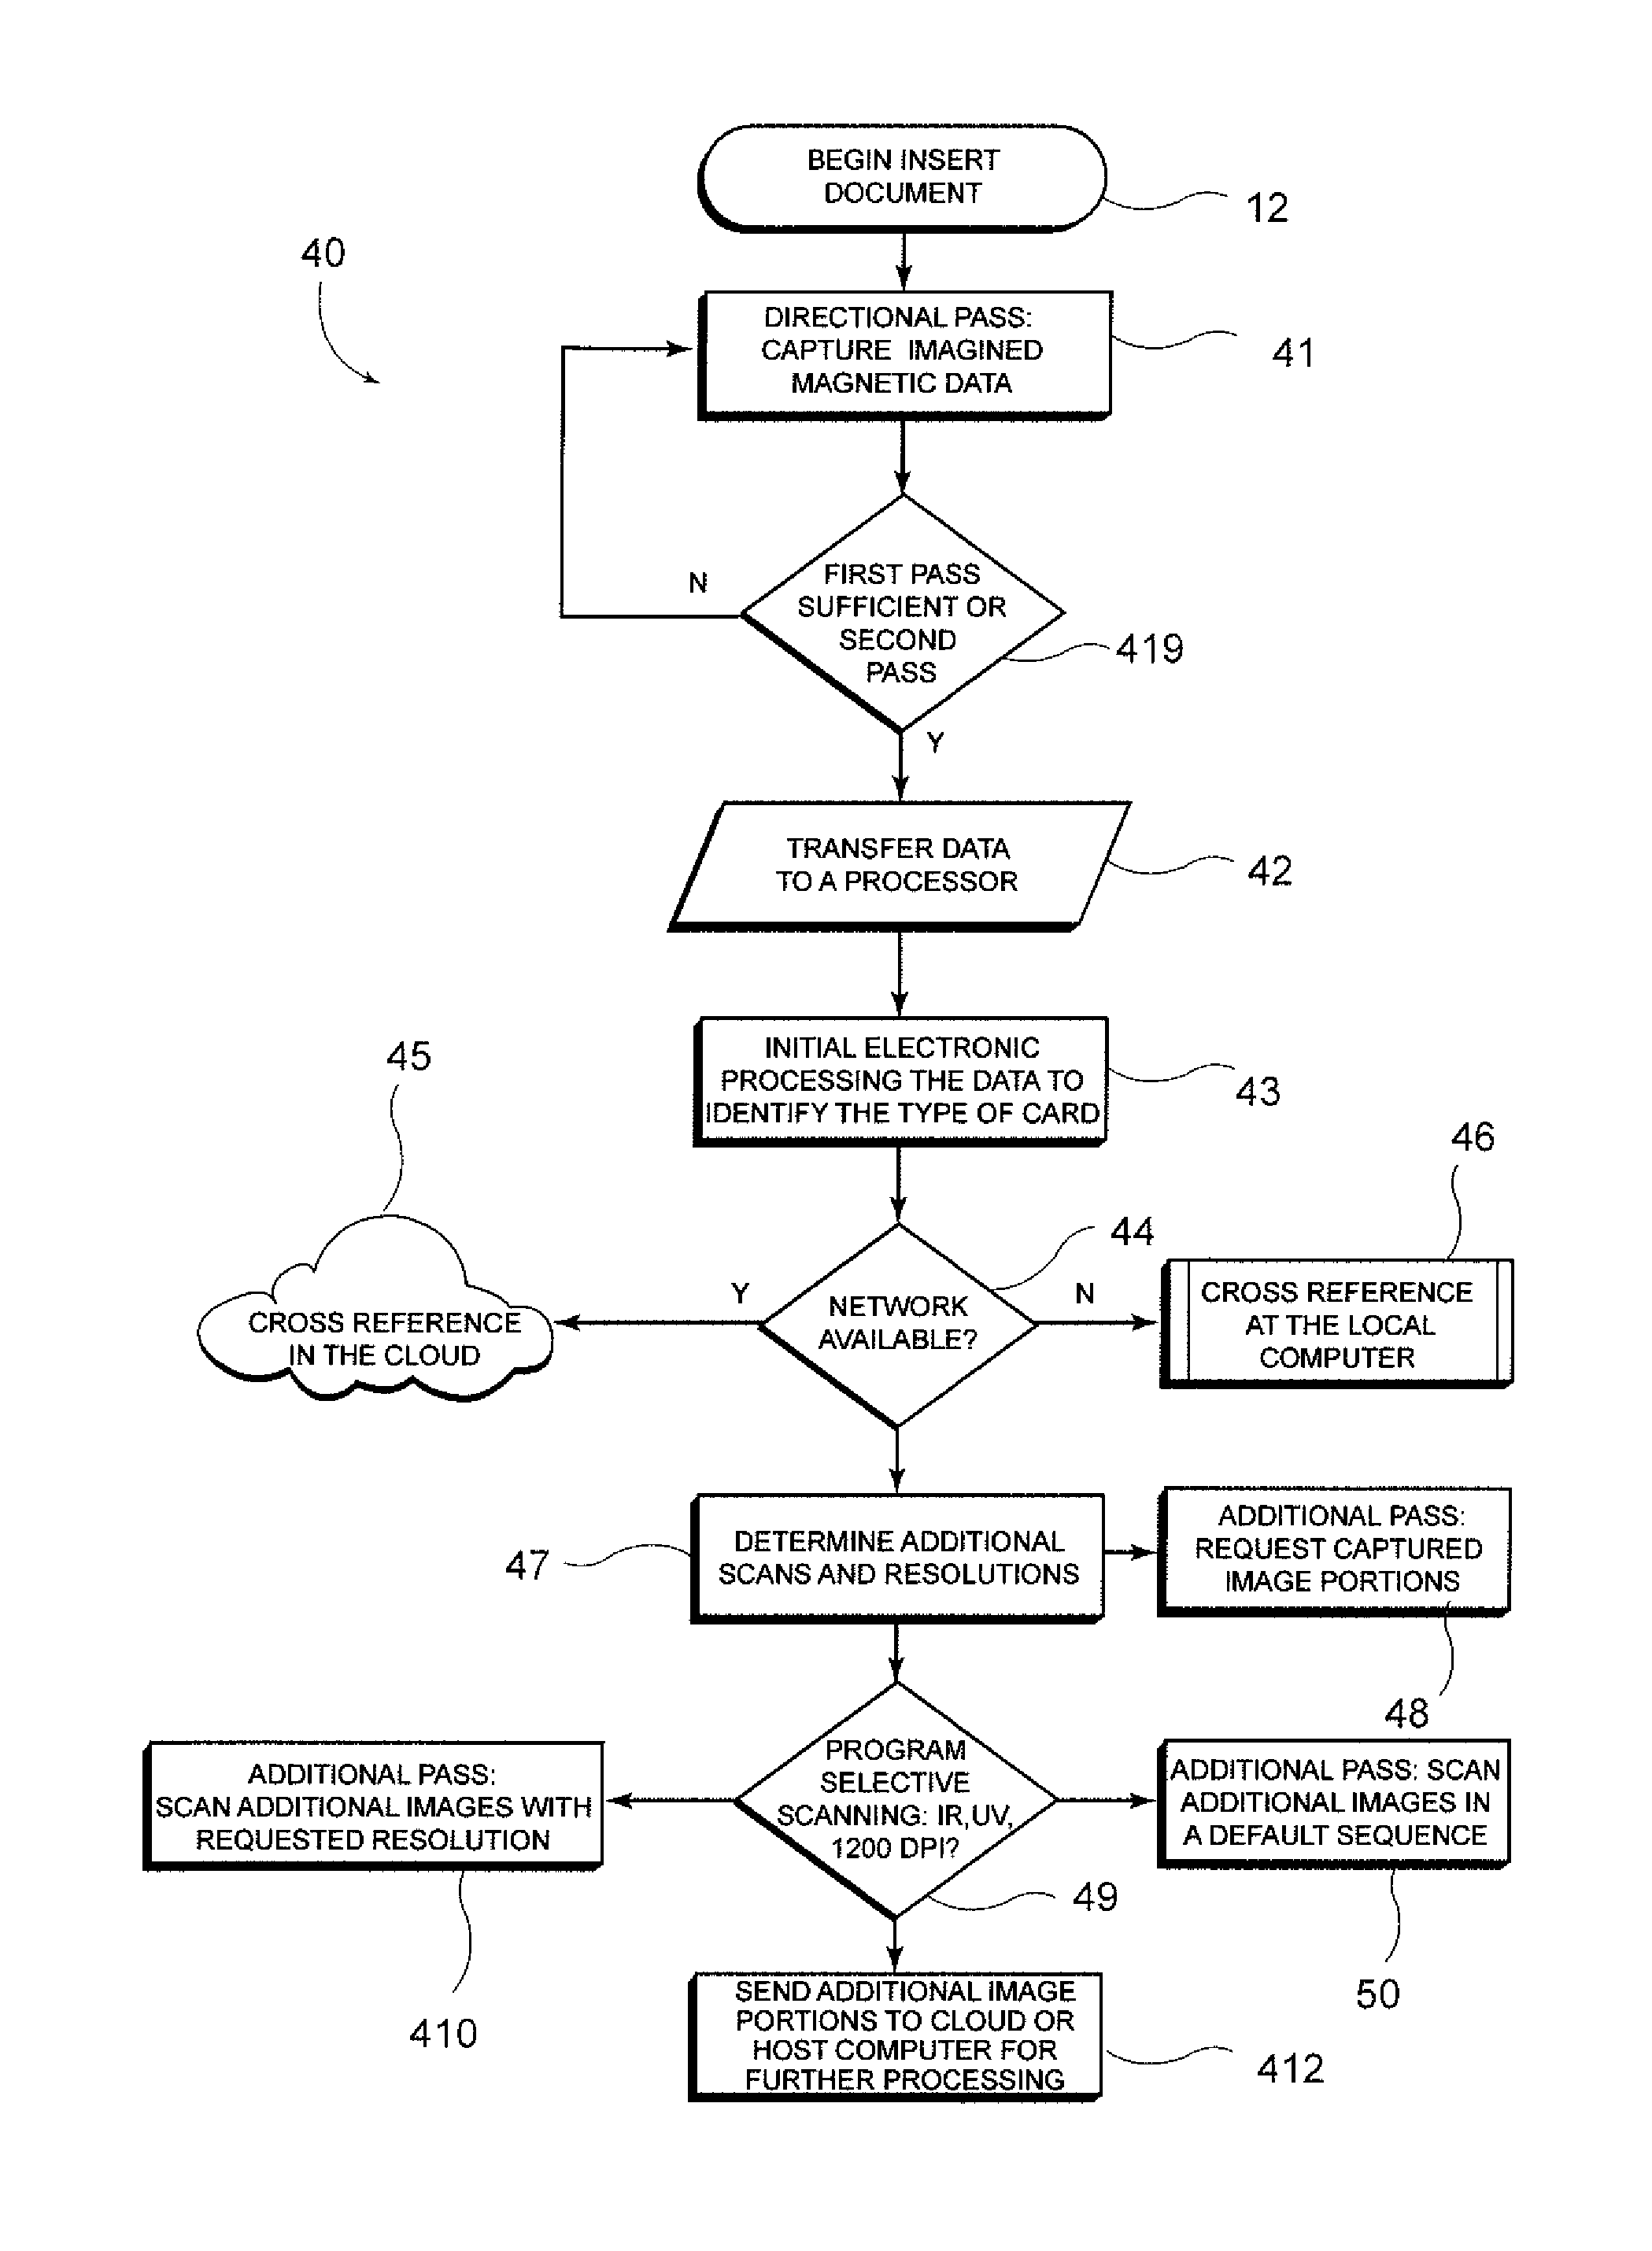 Method for Scanning and Processing Documents